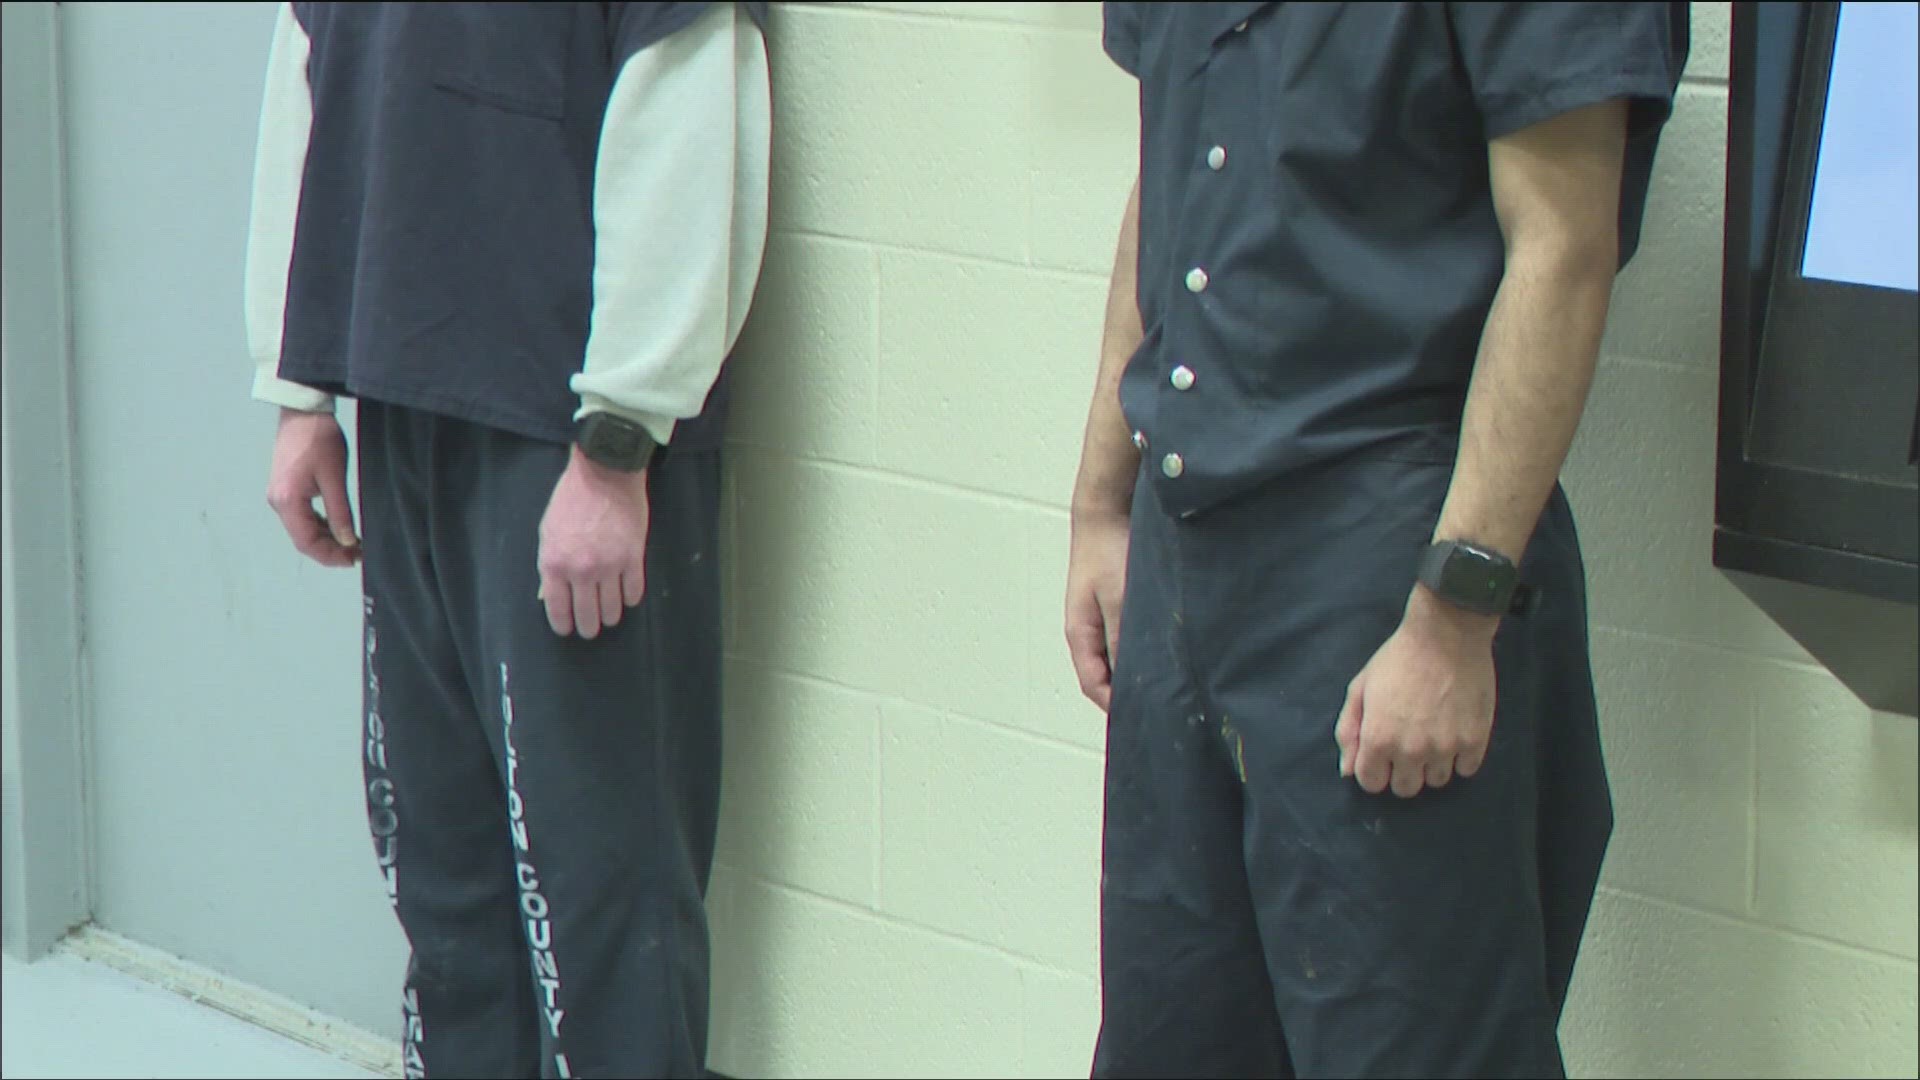 The bands come into use following a string of deaths at the jail.